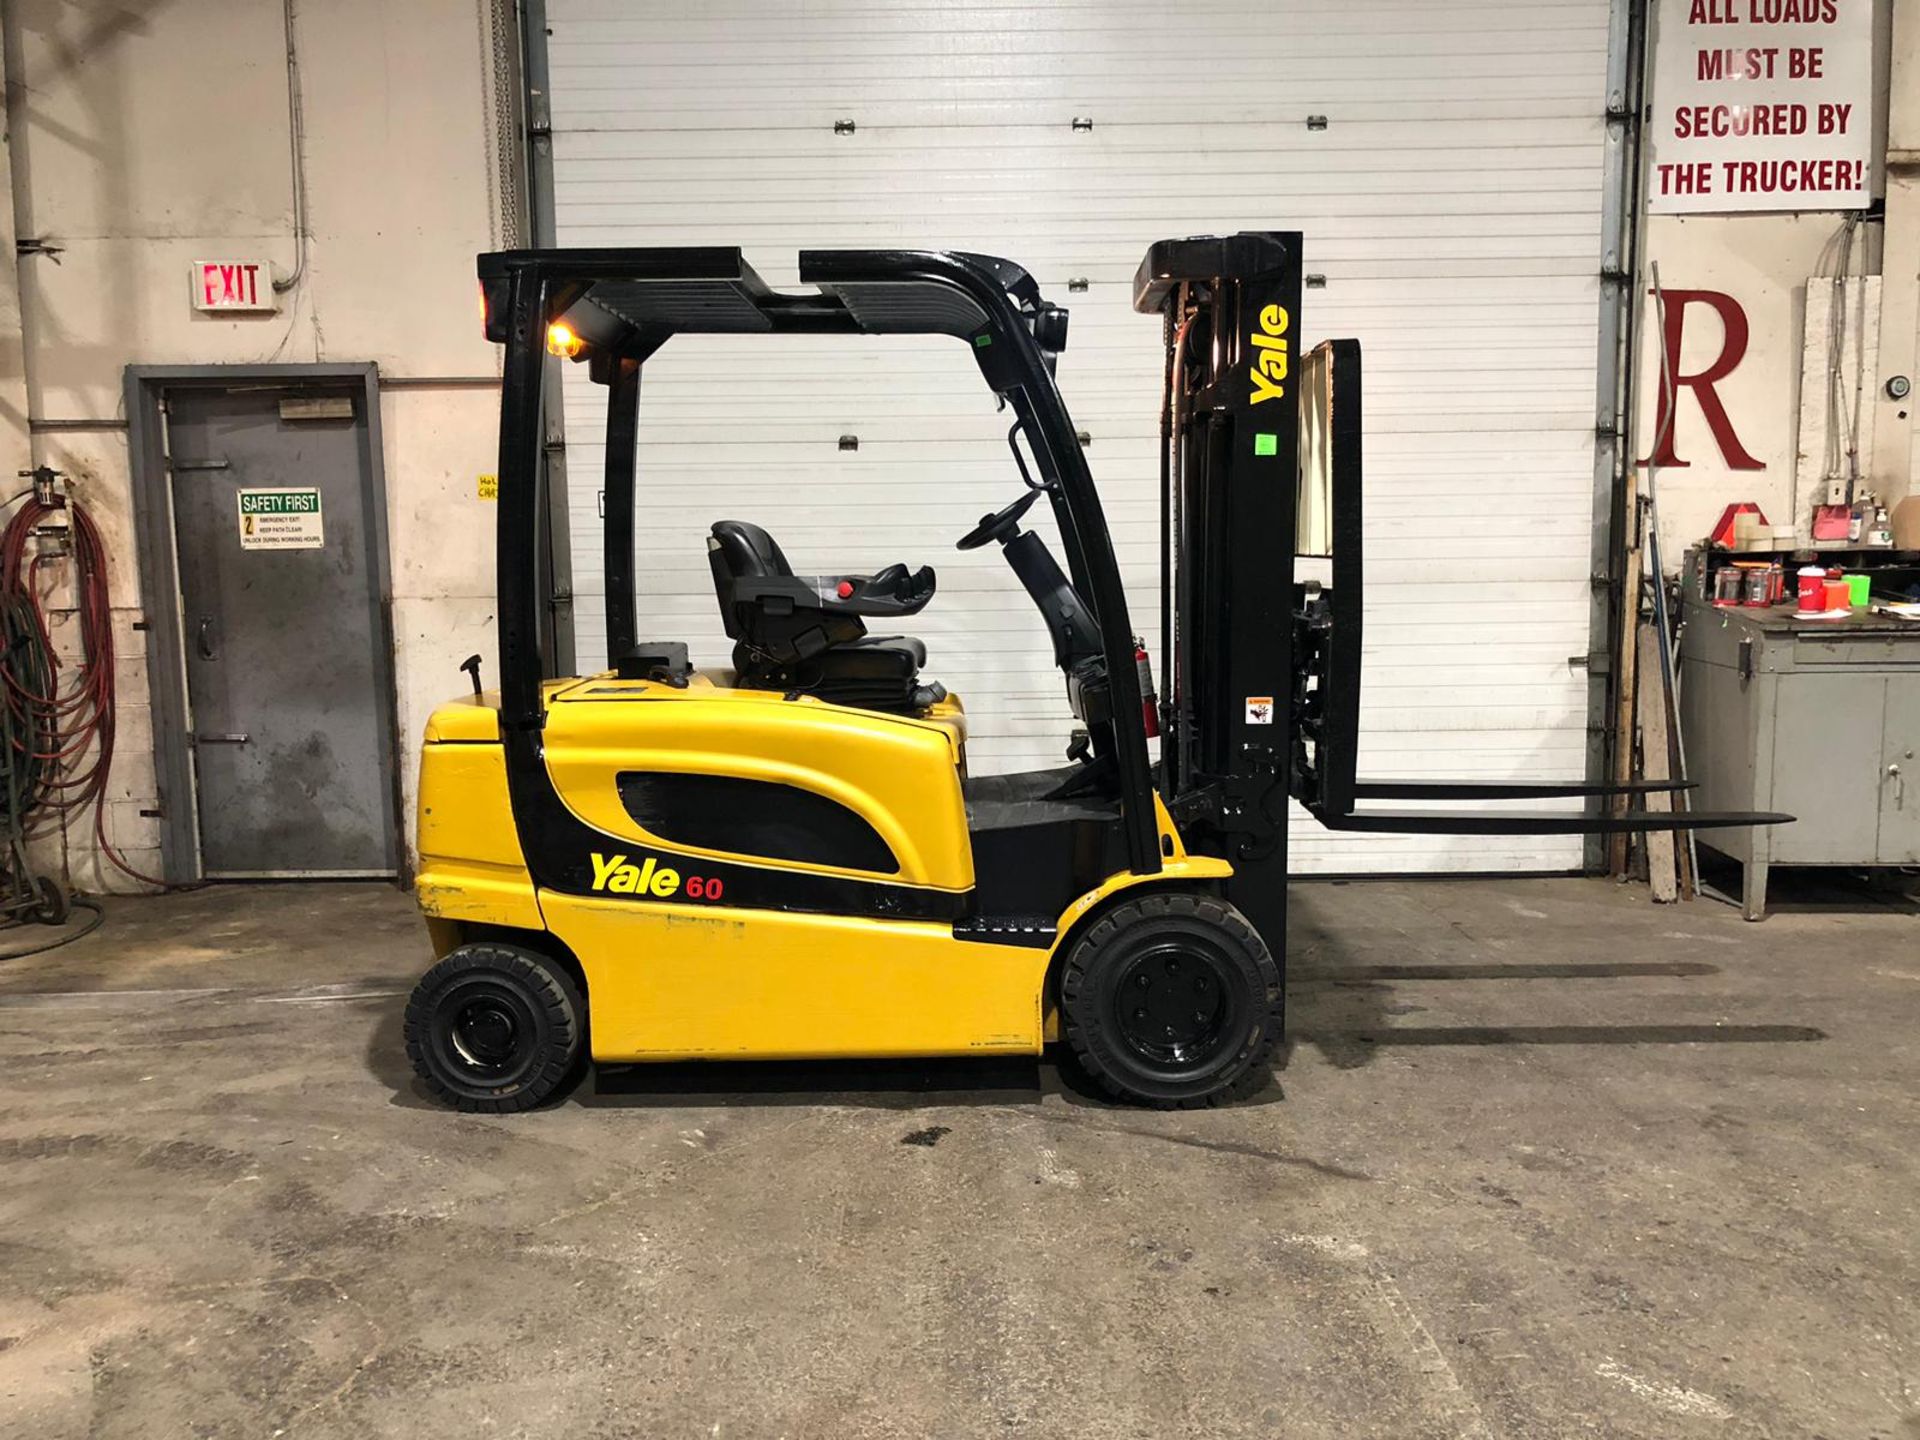 MINT 2019 Yale 6,000lbs Capacity Forklift INDOOR / OUTDOOR Electric 80V with Sideshift & Fork